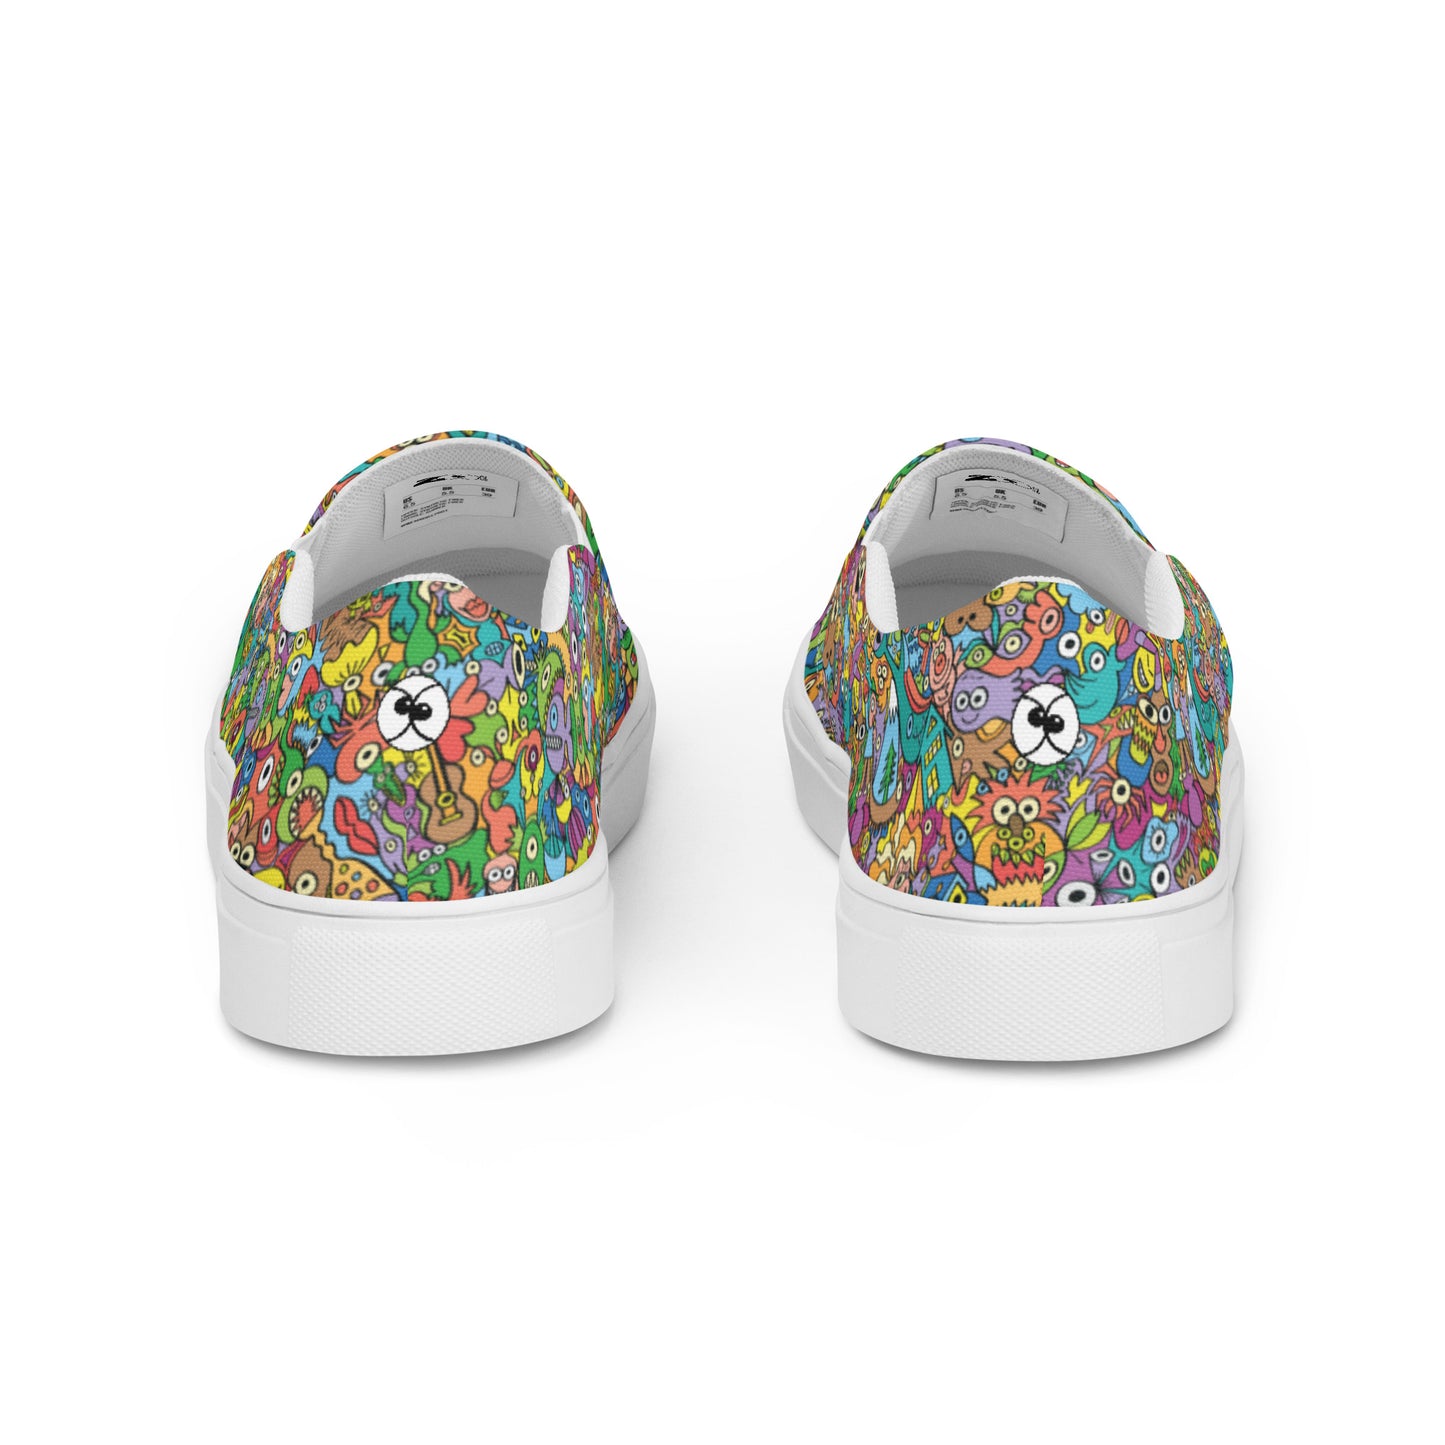 Cheerful crowd enjoying a lively carnival Men’s slip-on canvas shoes. Back view